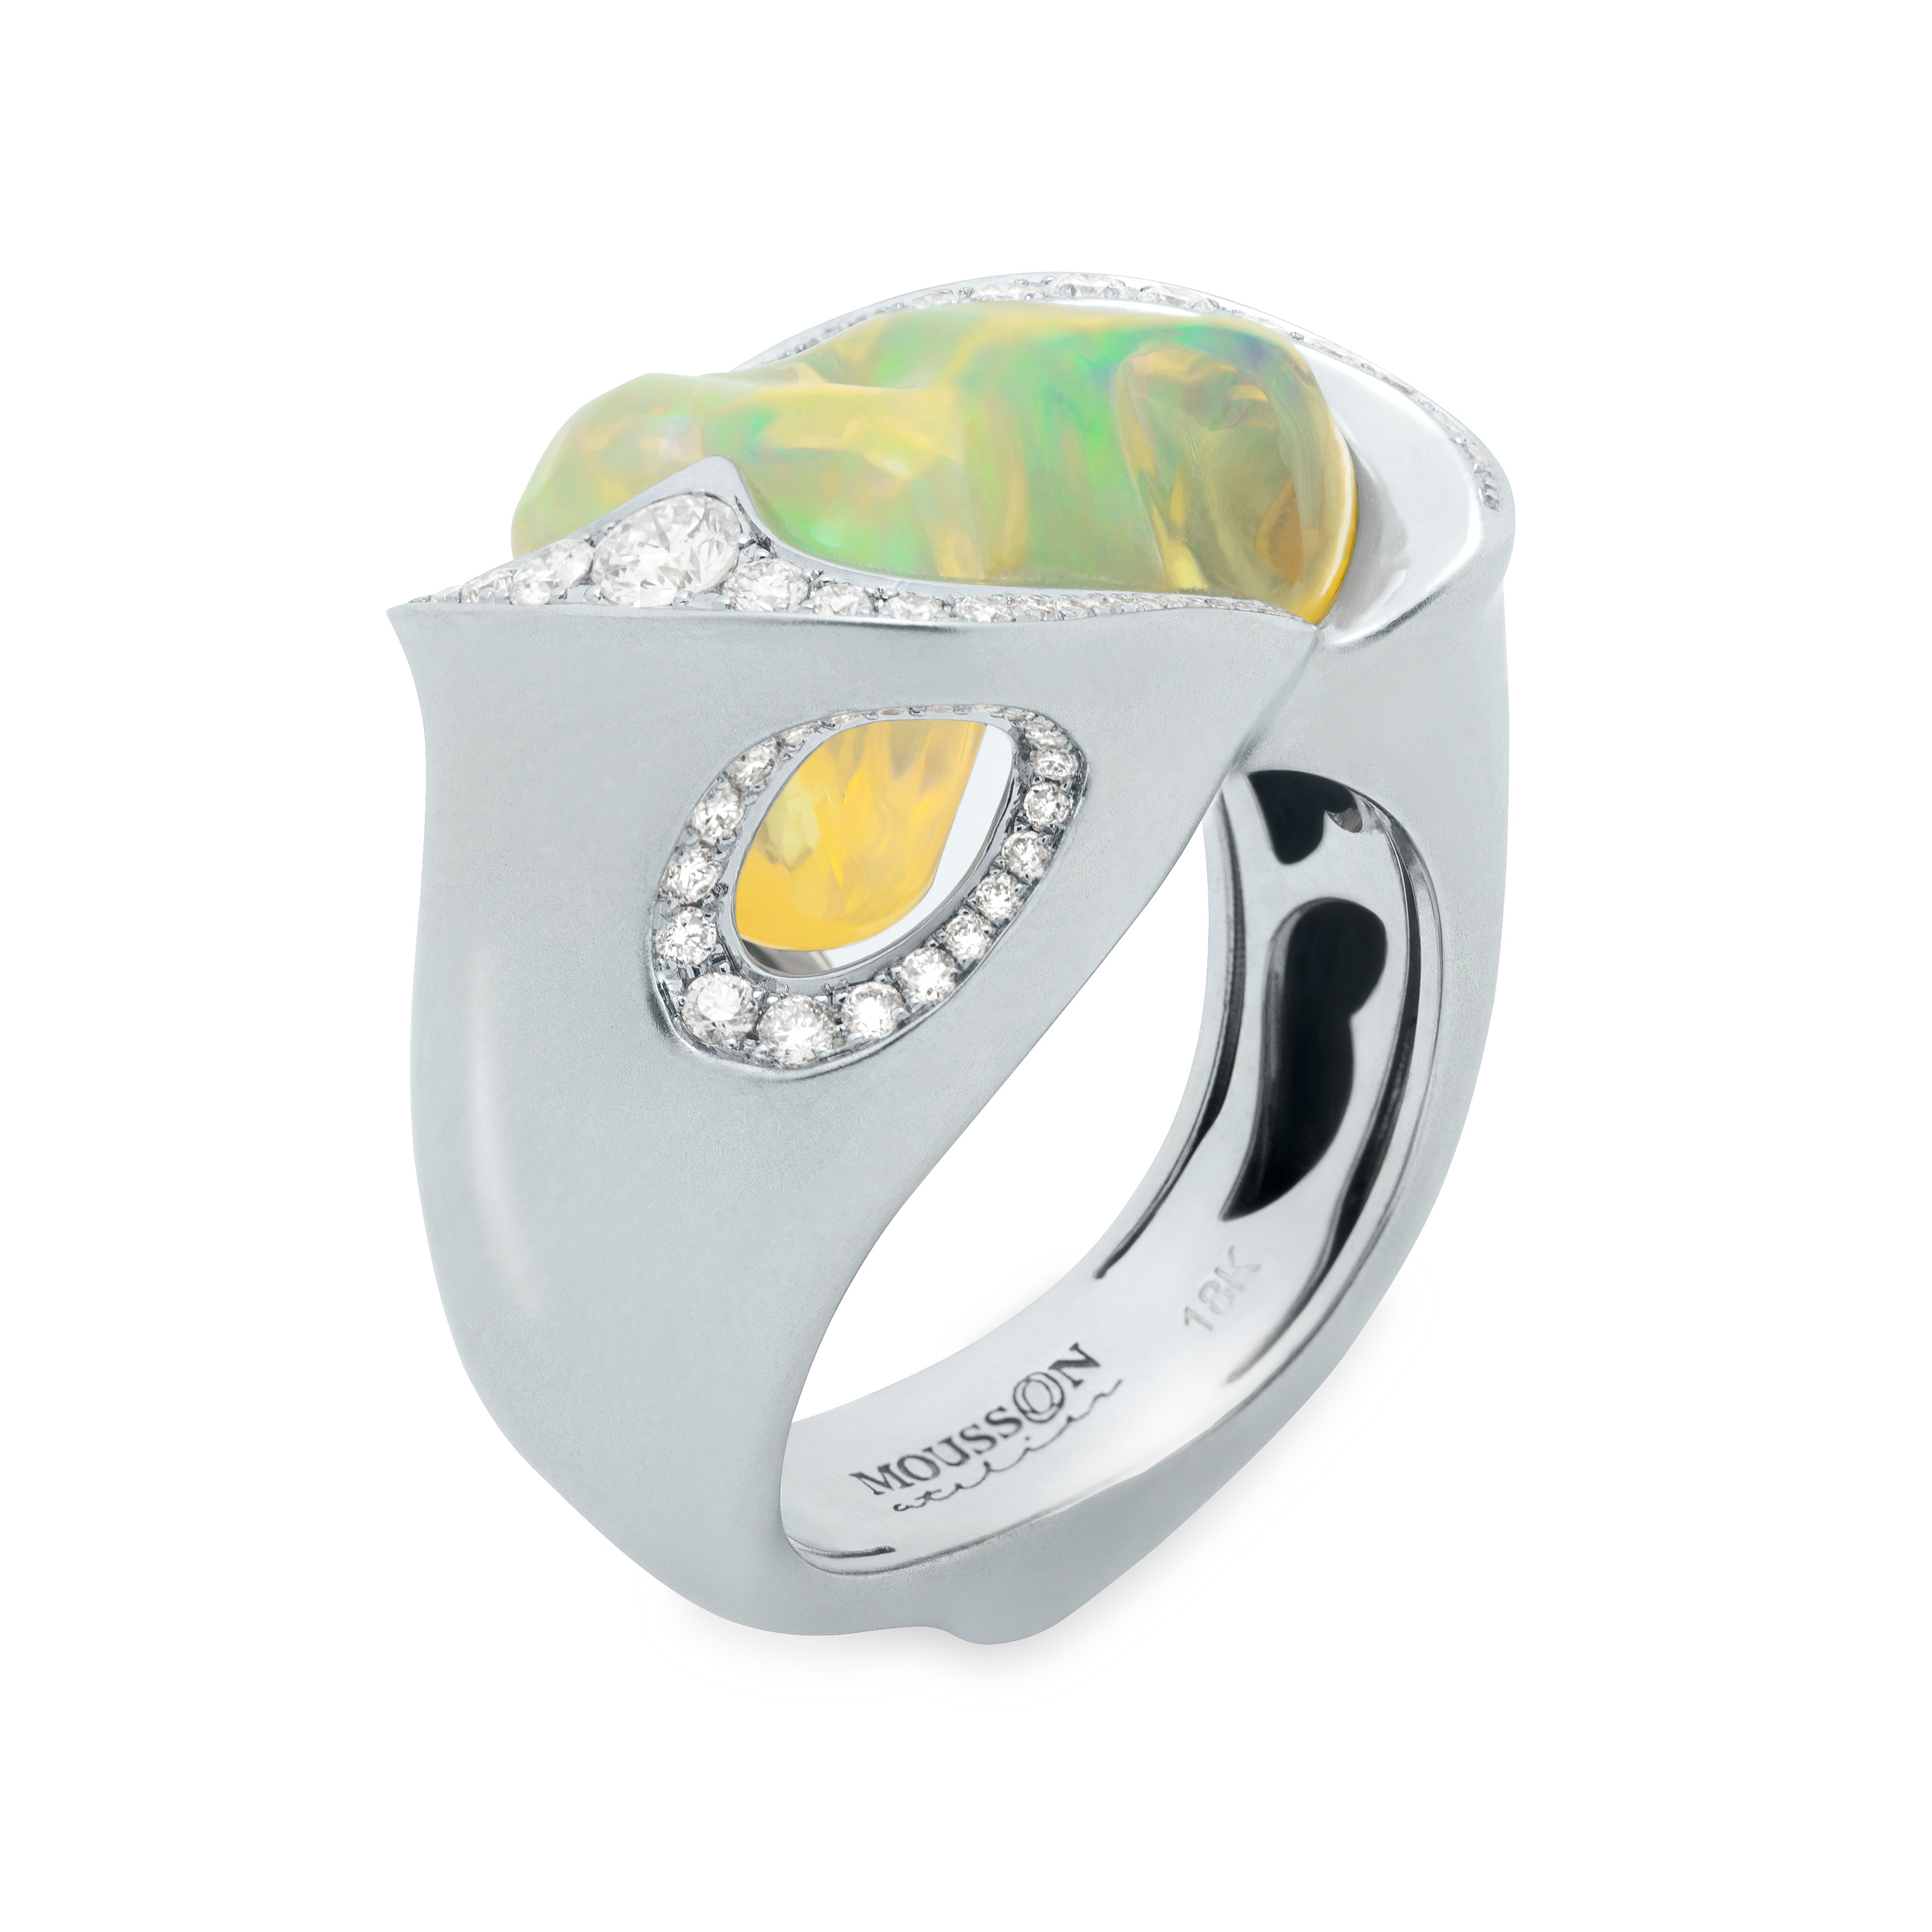 R 0028-0/4 18K White Gold, Mexican Fire Opal, Diamonds Ring